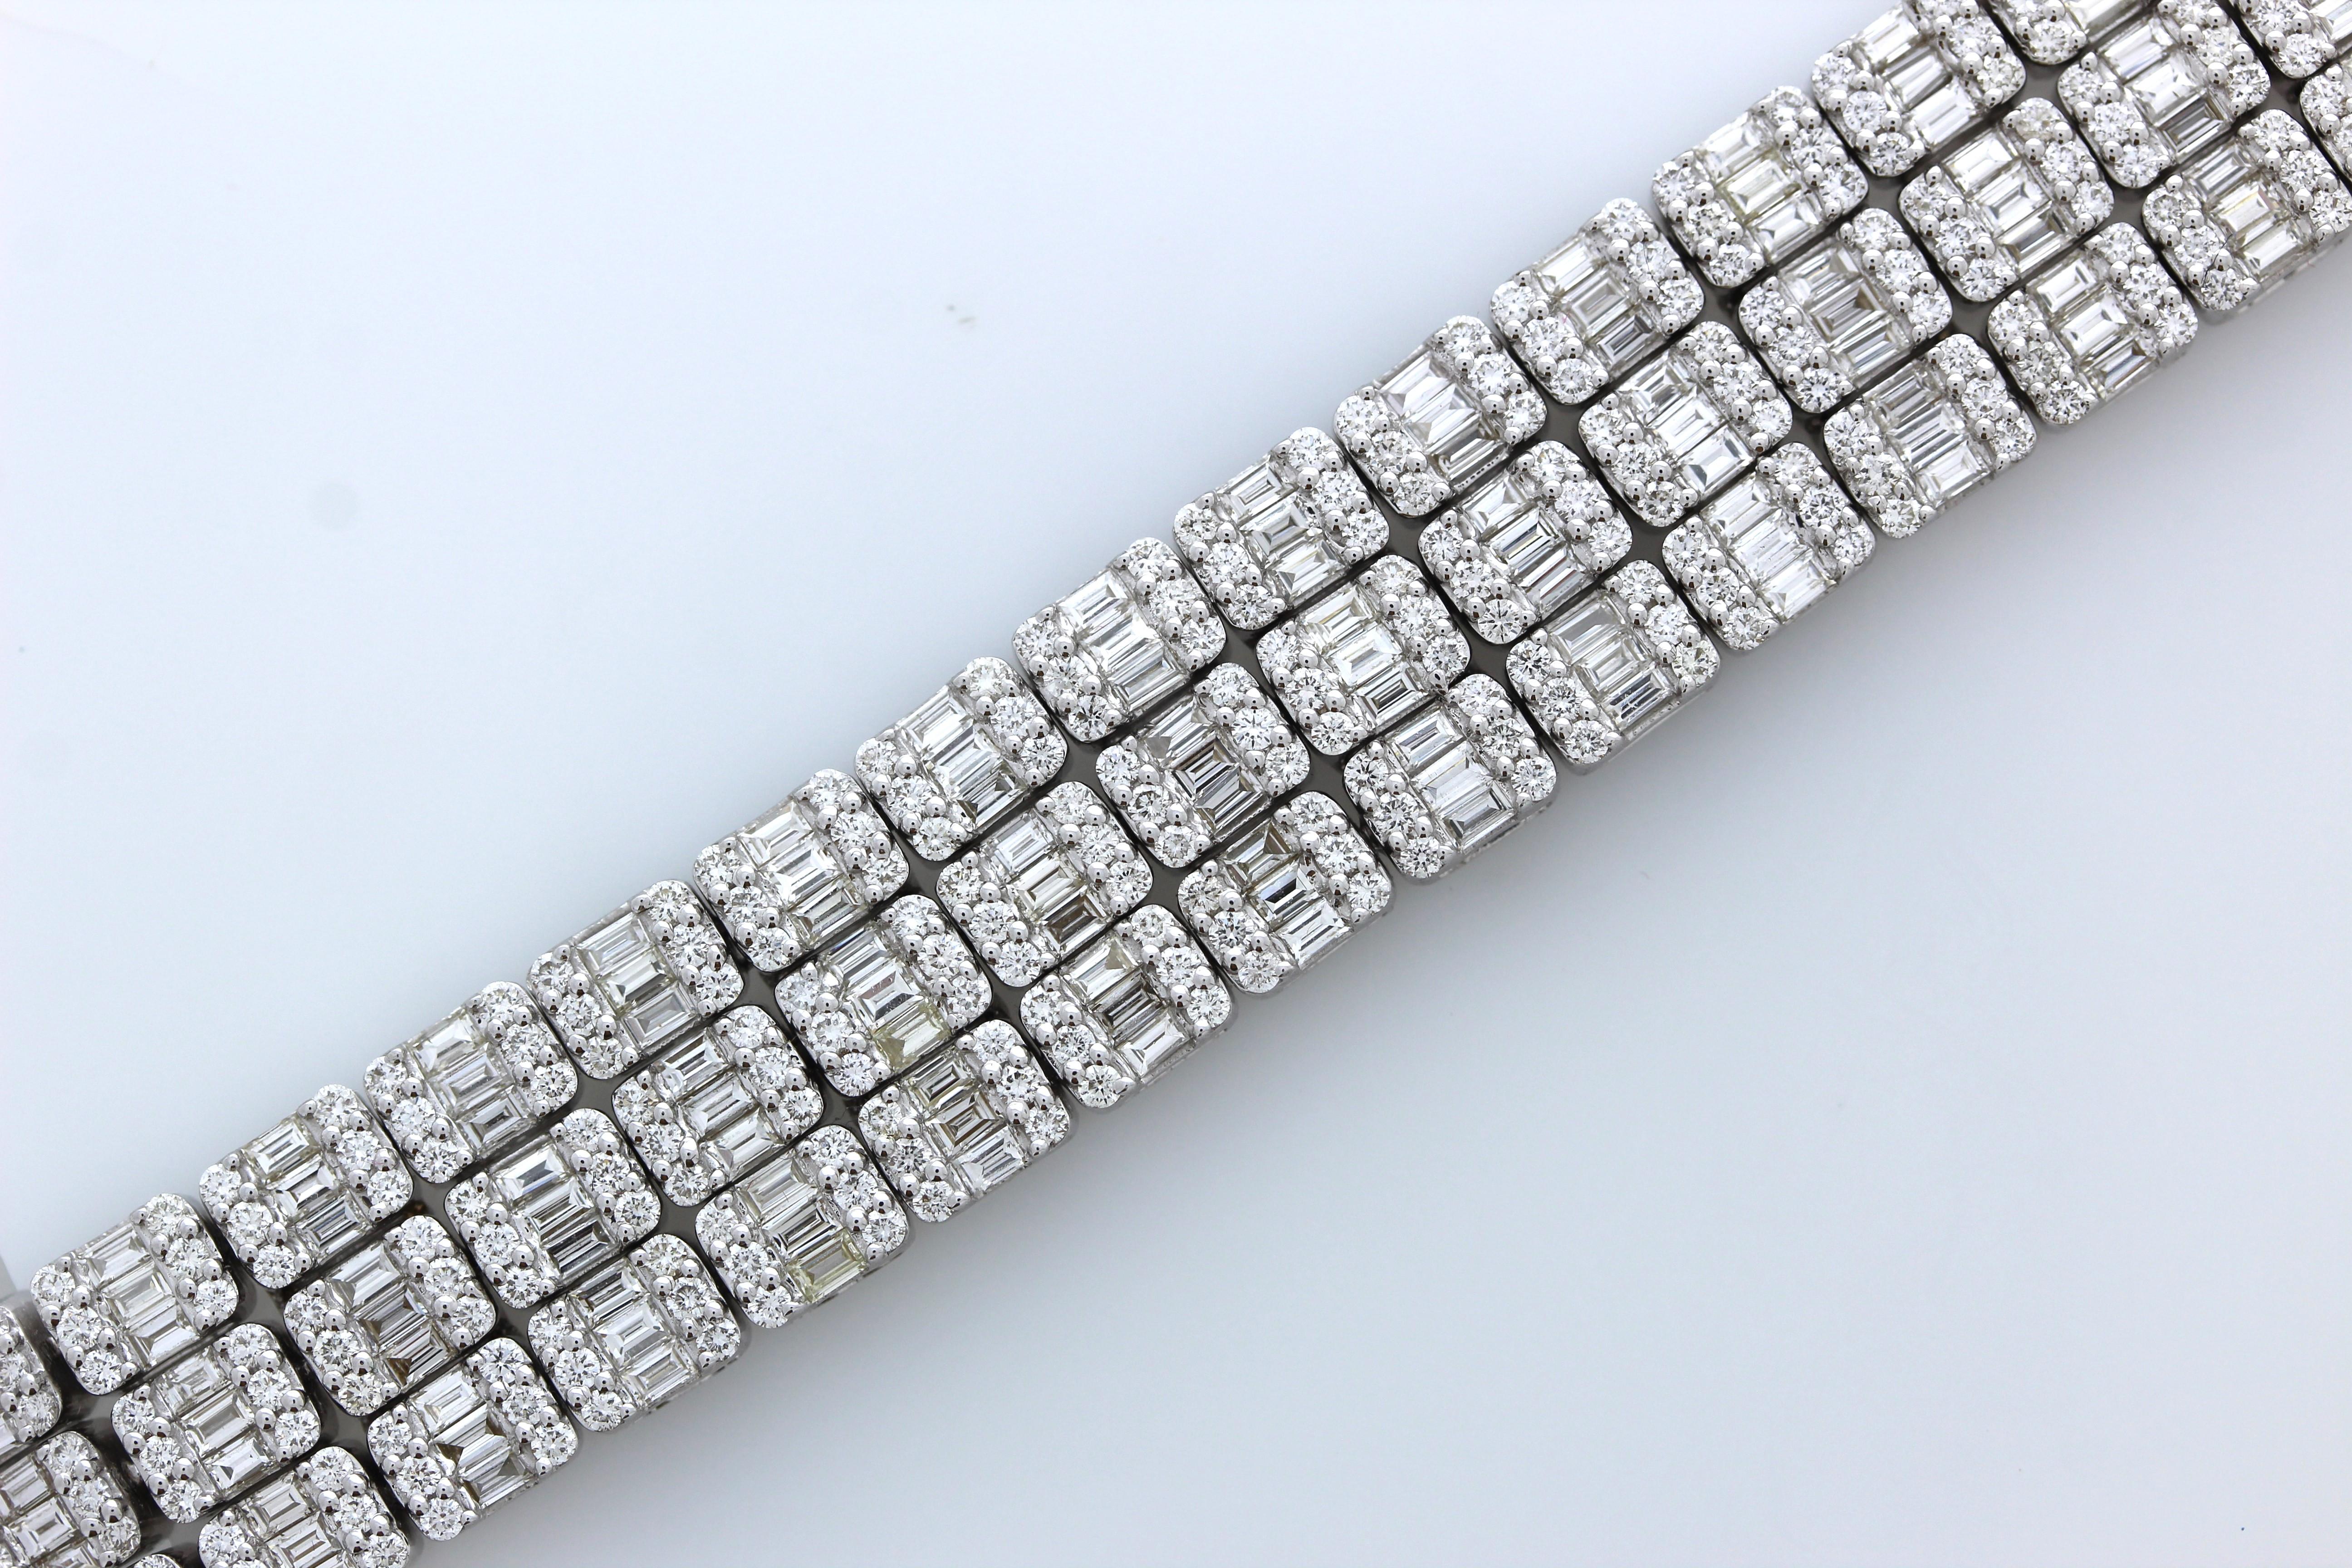 This diamond bracelet features 12.00 carats made up of Baguette & Round perfectly natural diamonds. They are matched in size, color, and luster. Created in 18K white gold. This beautiful fancy diamond bracelet closes securely. It's elegant on its